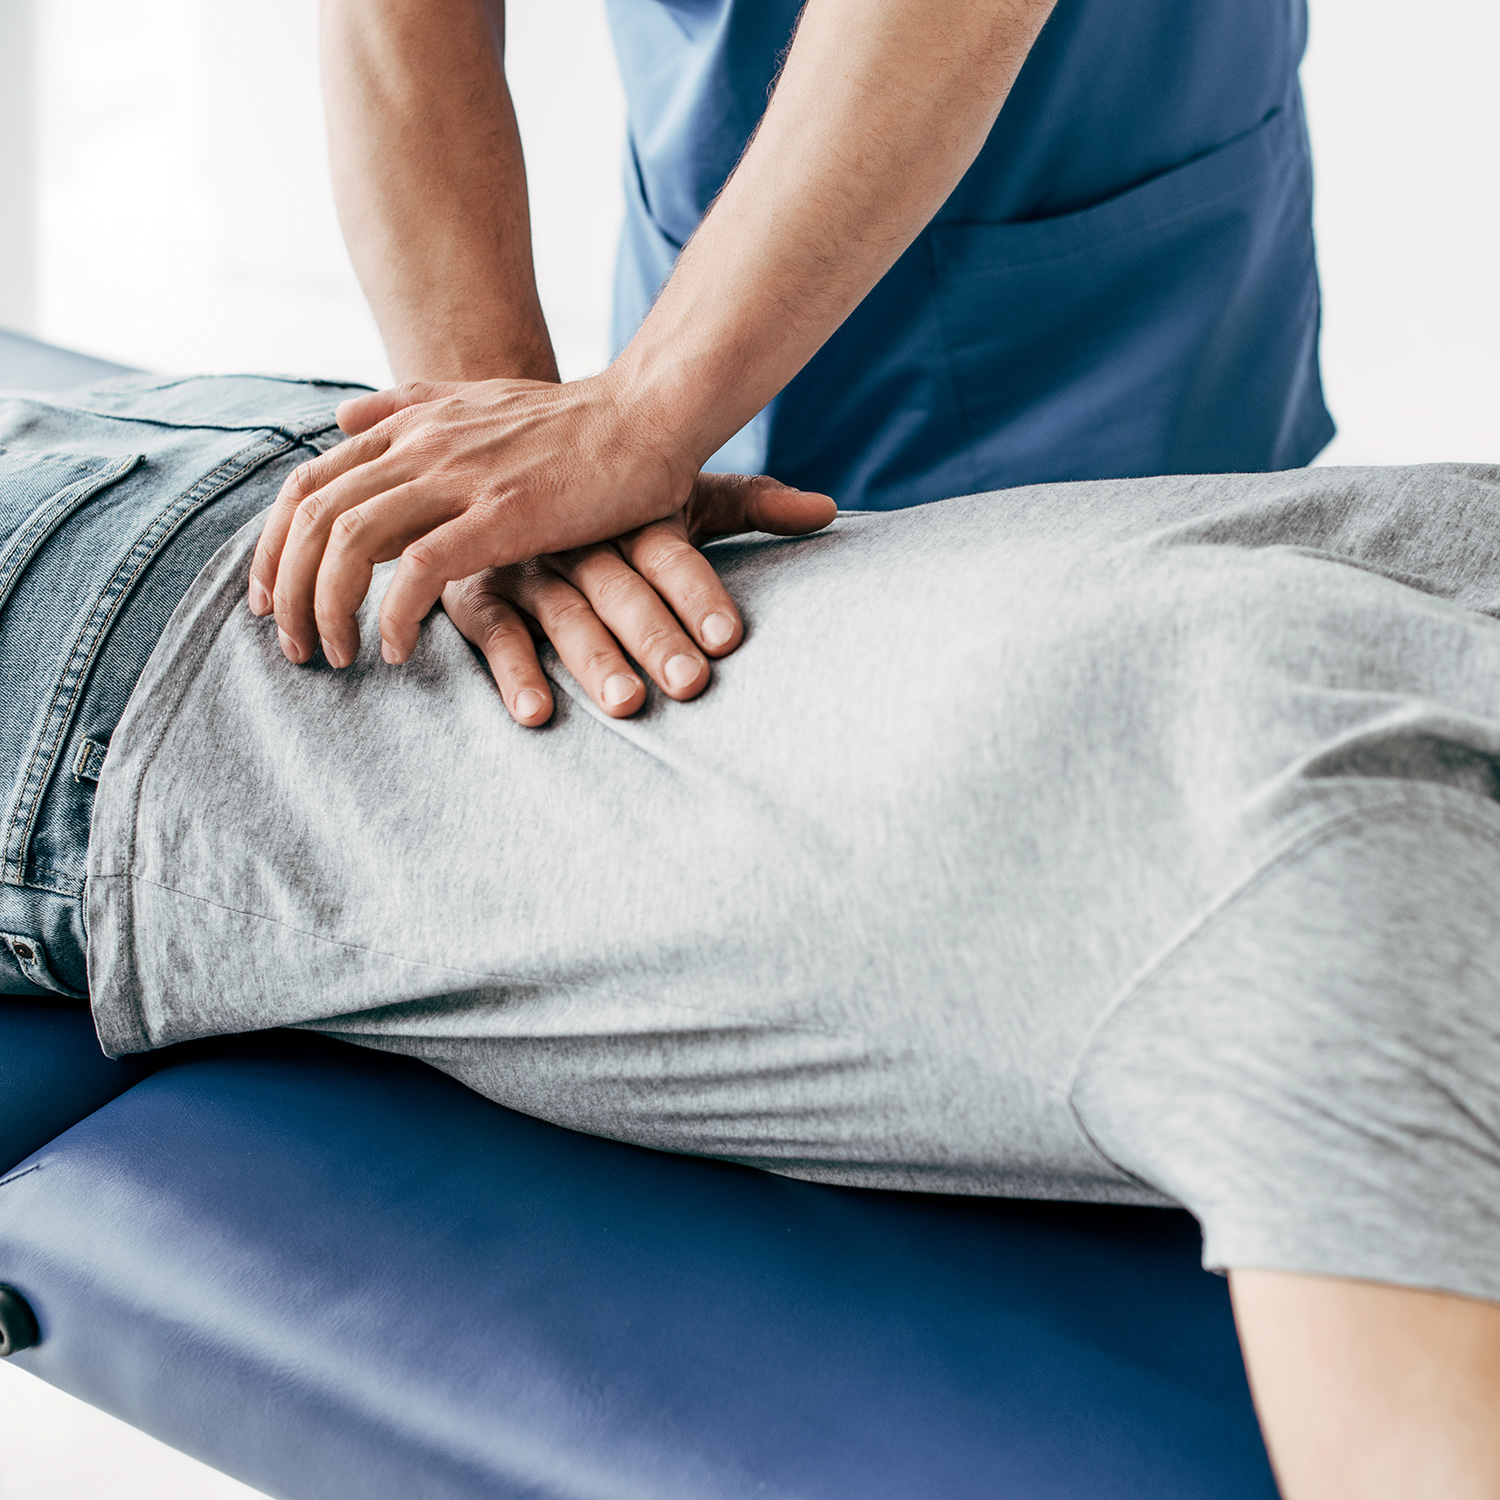 Spinal Manipulative Therapy for Chronic Low Back Pain 